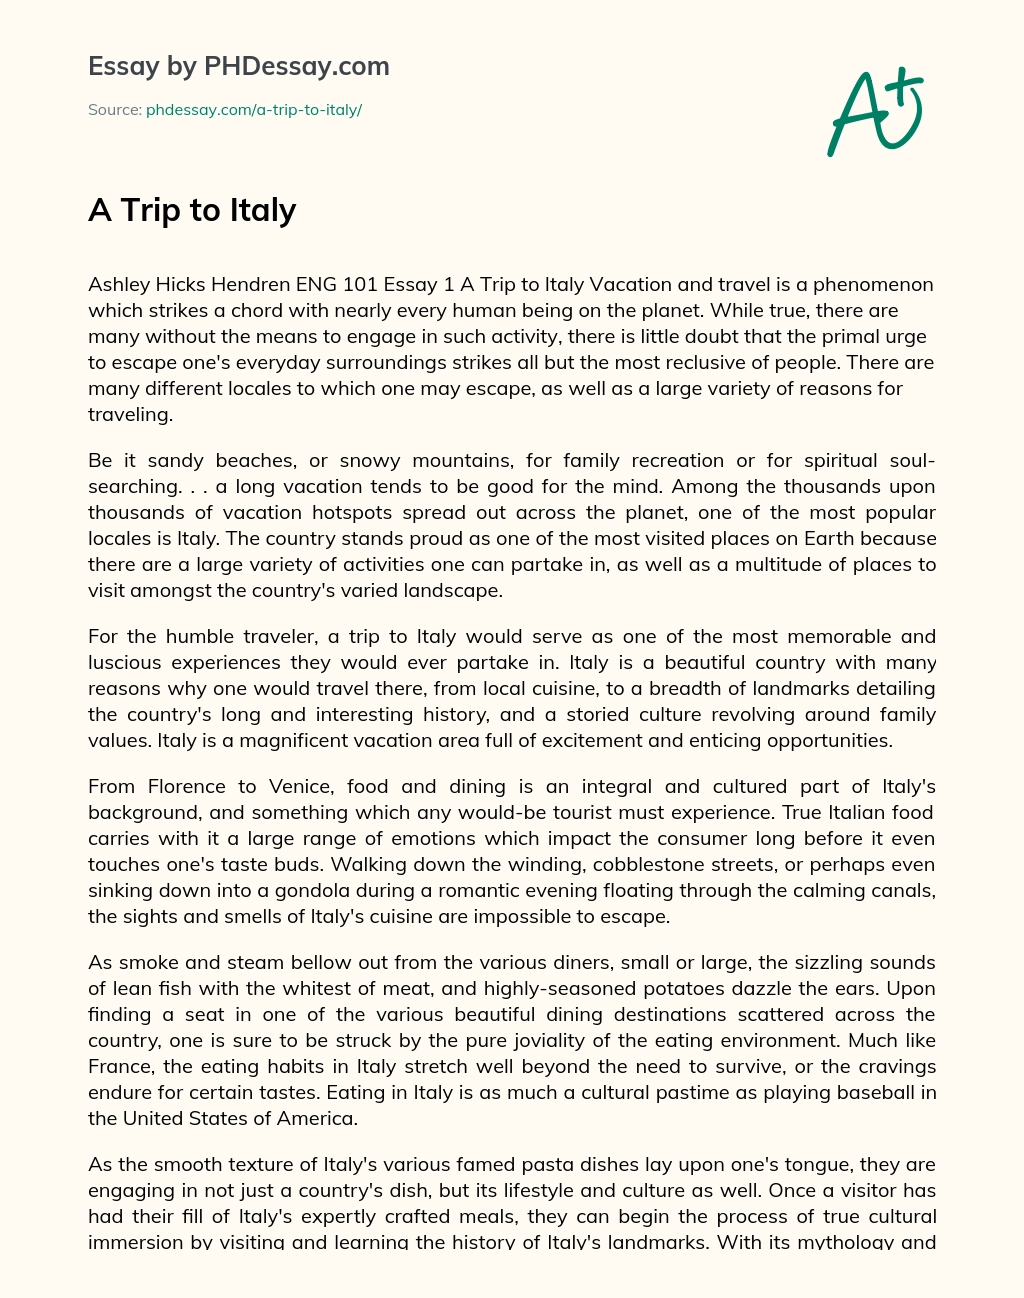 Реферат: Italy Essay Research Paper ITALYThe country I